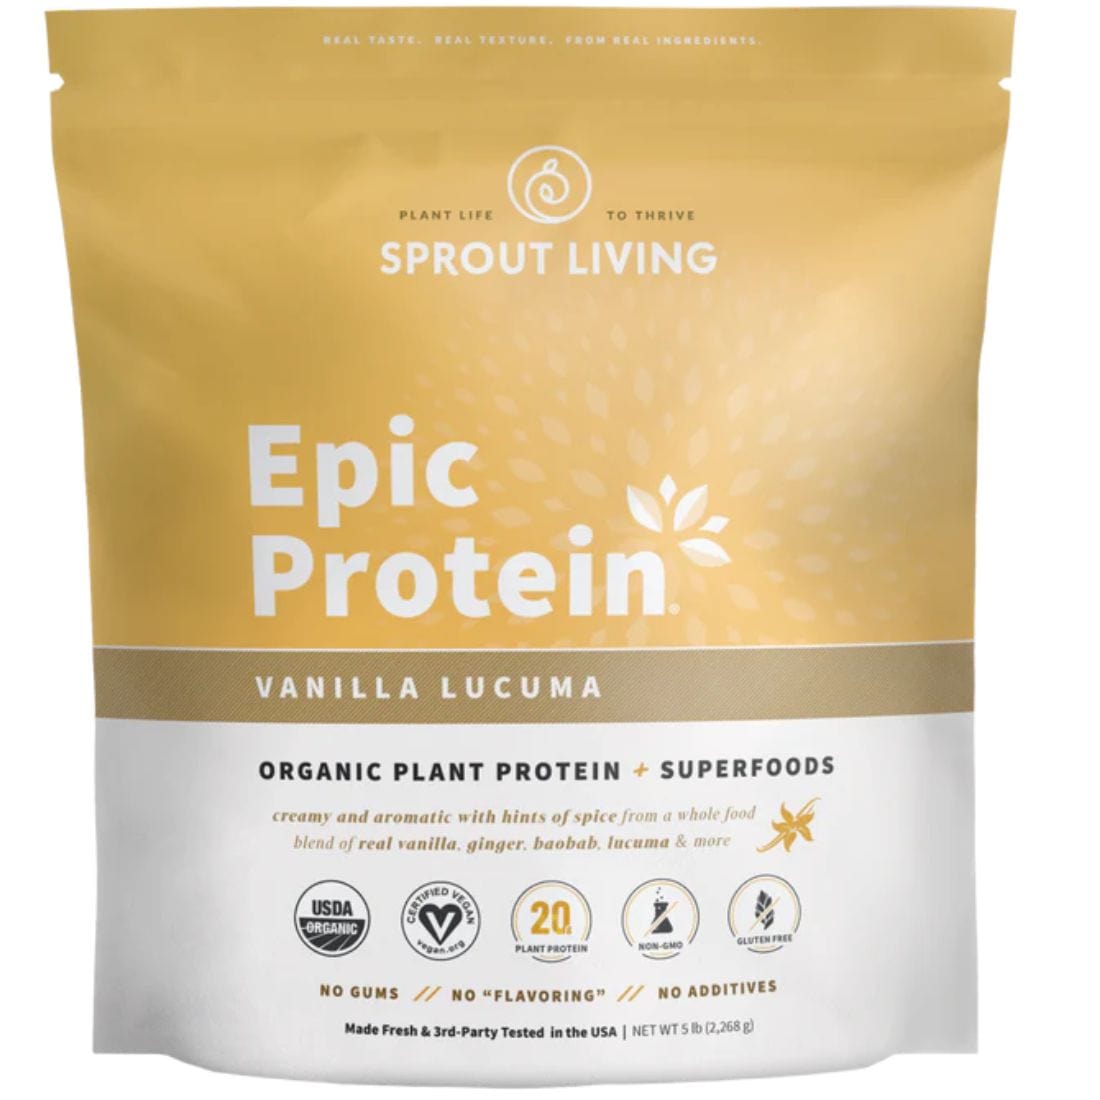 sprout-living-epic-protein-5lbs-bag-vanilla